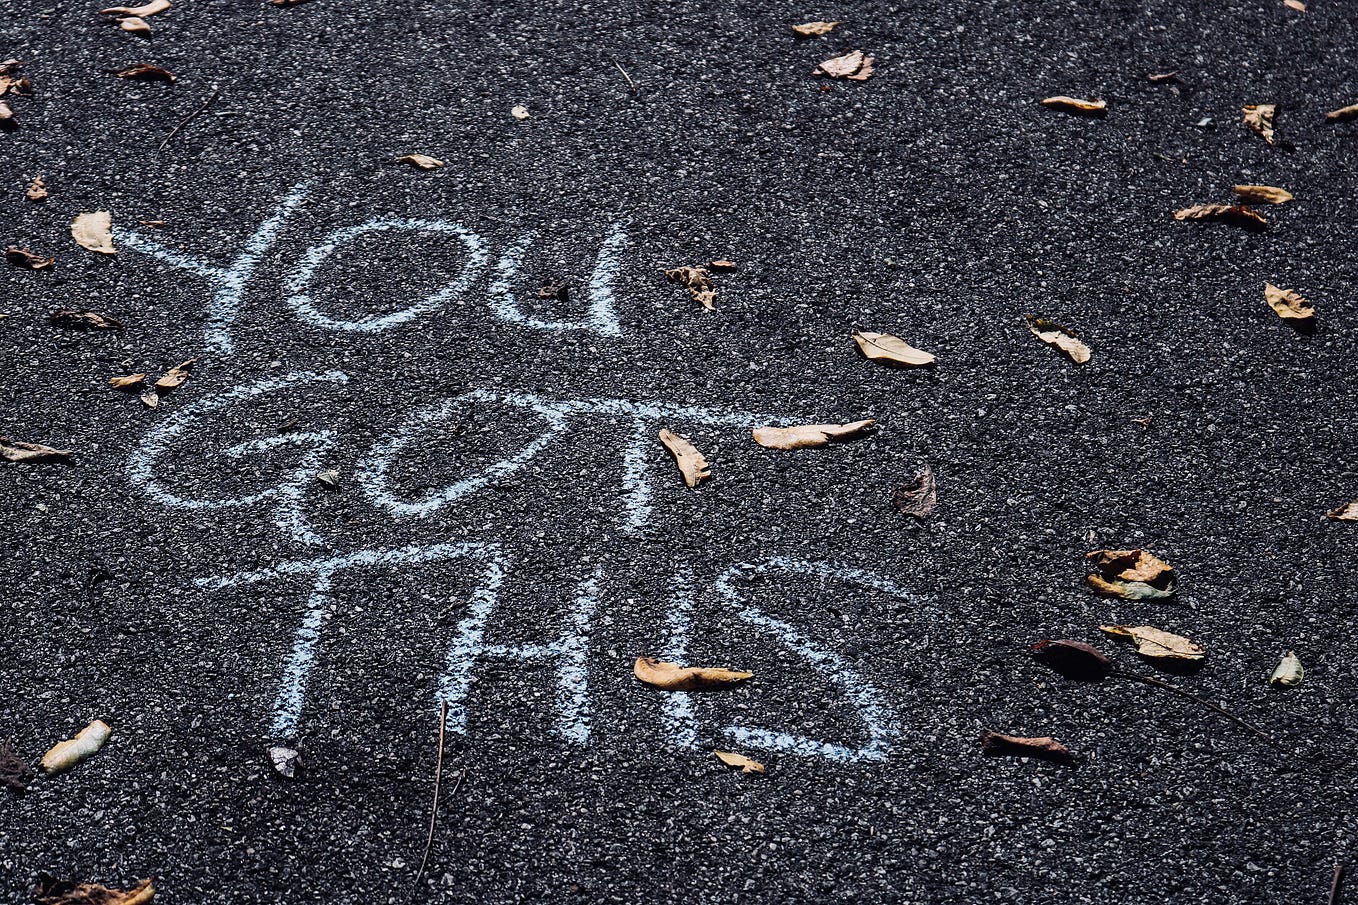 The words “YOU GOT THIS” are written in chalk on an asphalt surface. A few dried leaves are scattered on the ground around the writing.